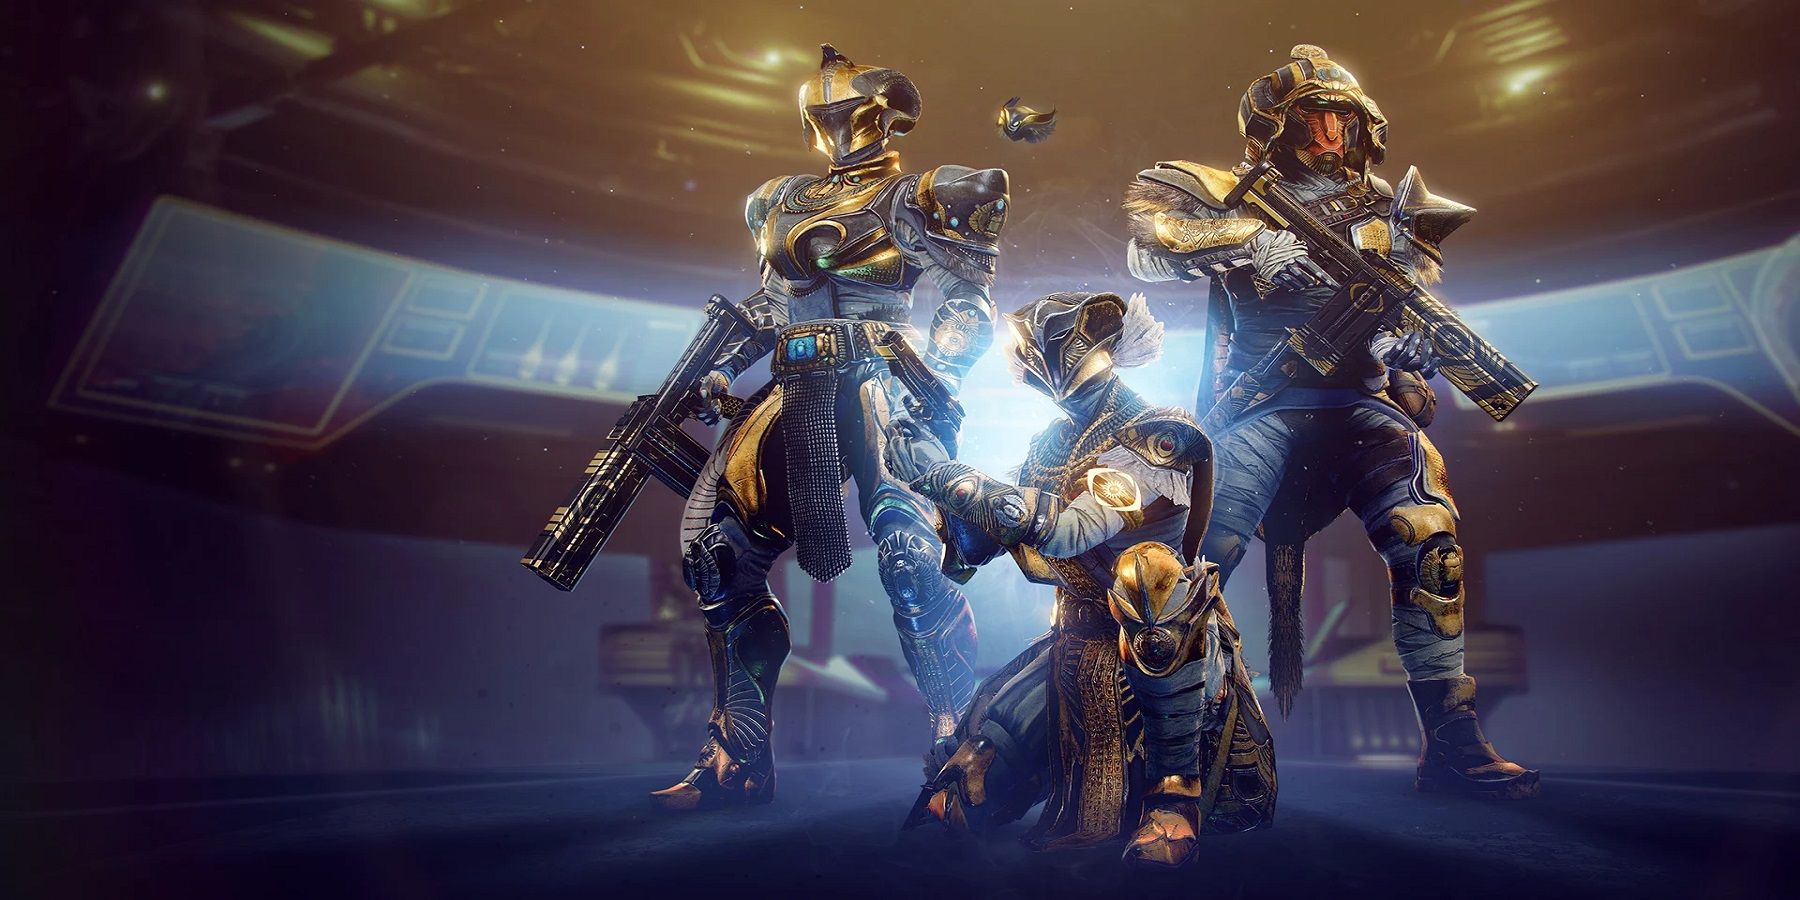 Bungie gave players a glimpse of the new Trials armor sets coming in Season 17.